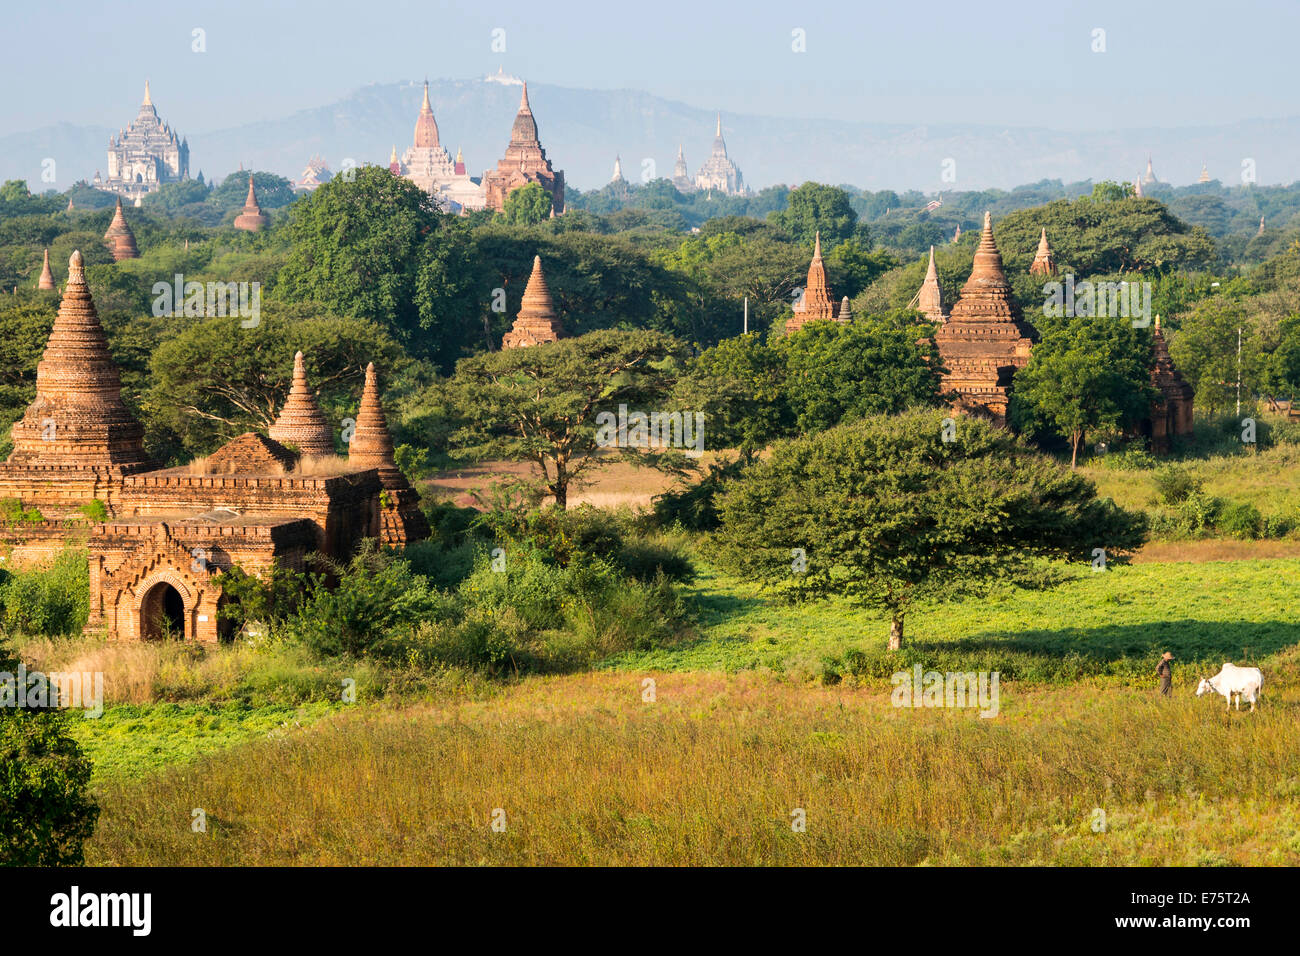 Ananda Temple, gilded tower structure or Shikhara, Thatbyinnyu Temple, stupas and pagodas in the temple complex of the Plateau Stock Photo